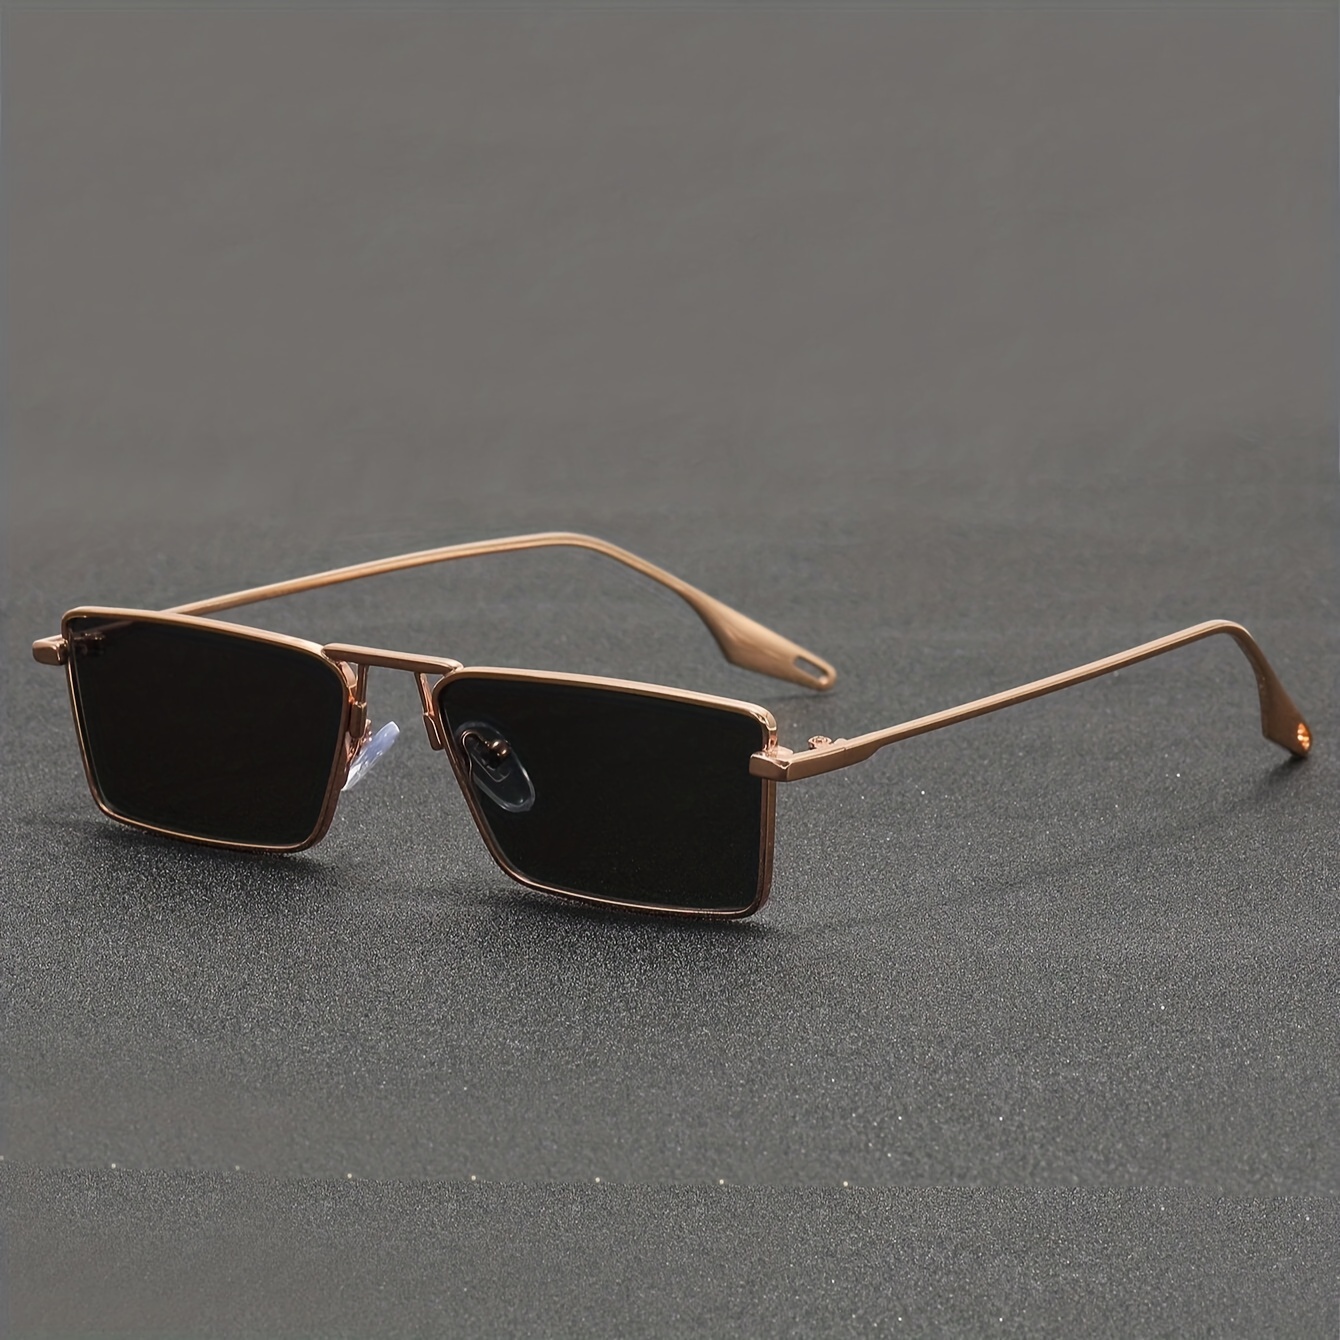 

Retro Punk Cool Golden Top Bridge Rectangle Fashion Glasses, Metal Frame, For Men Women Outdoor Sports Party Vacation Travel Driving Fishing Supply Photo Prop